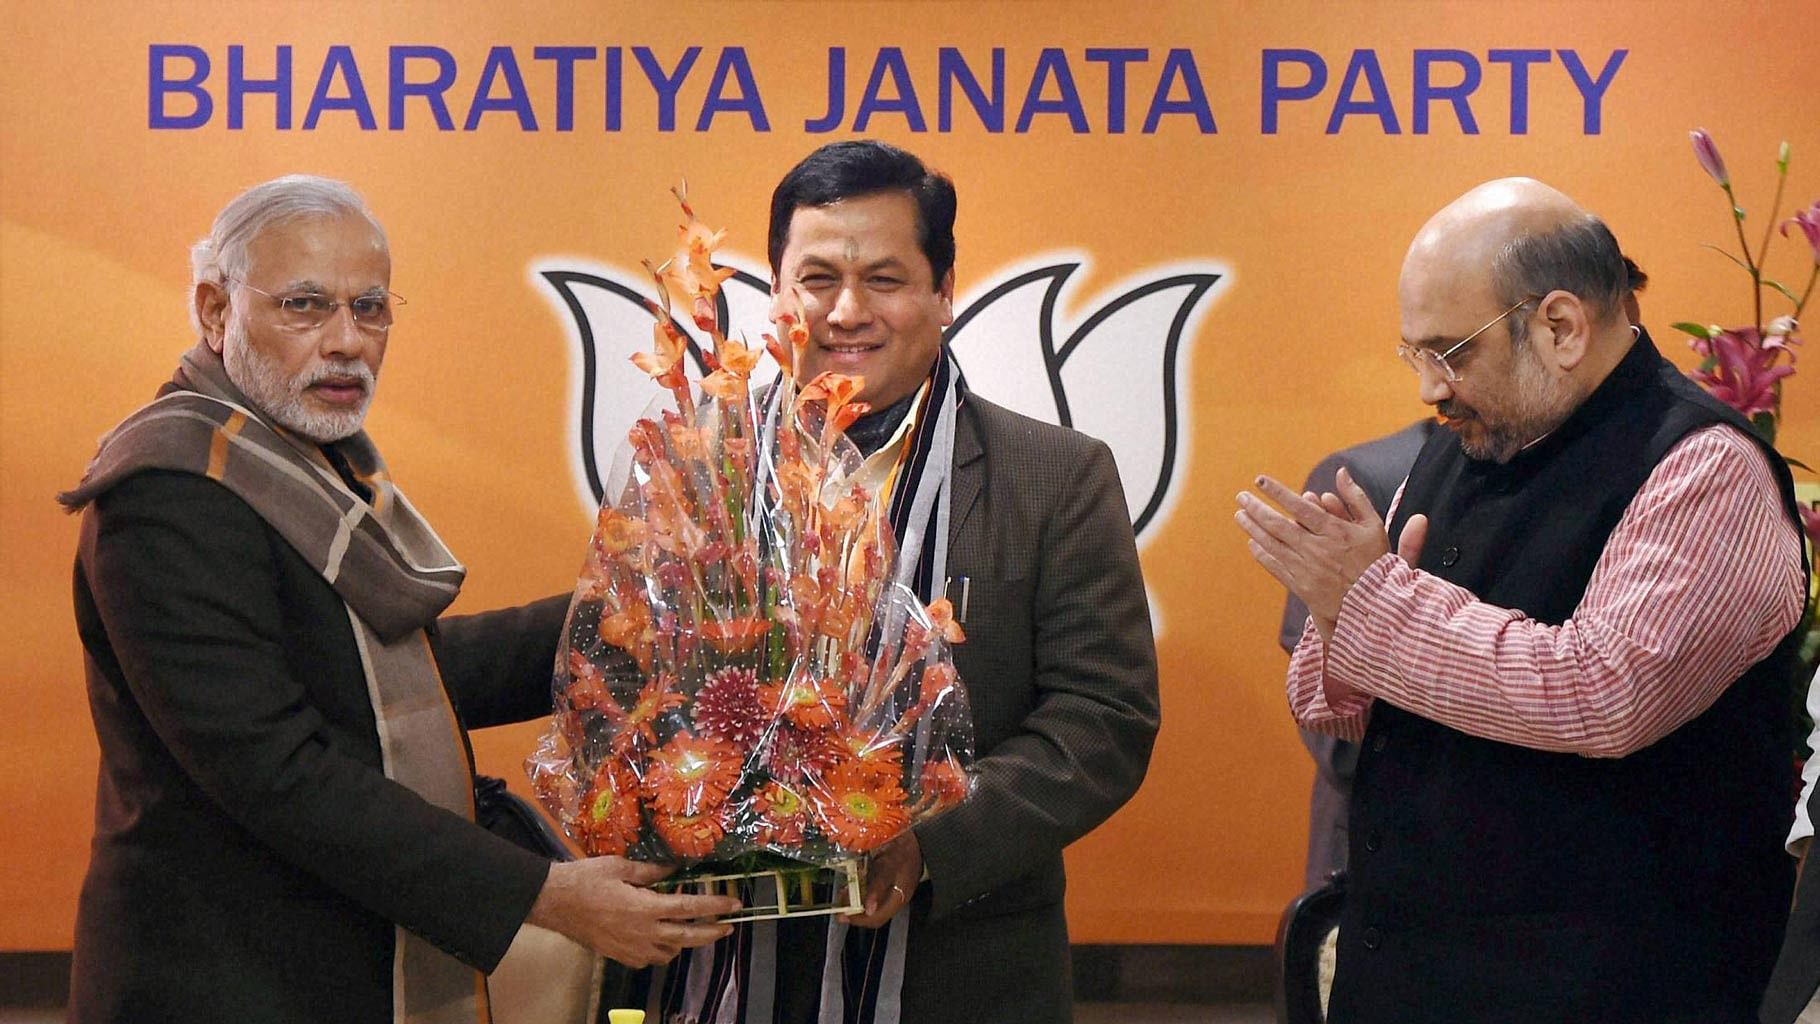 Prime Minister Narendra Modi greets party leader Sarbananda Sonowal after he was named BJP’s chief ministerial candidate for the upcoming Assam polls. (Photo: PTI)